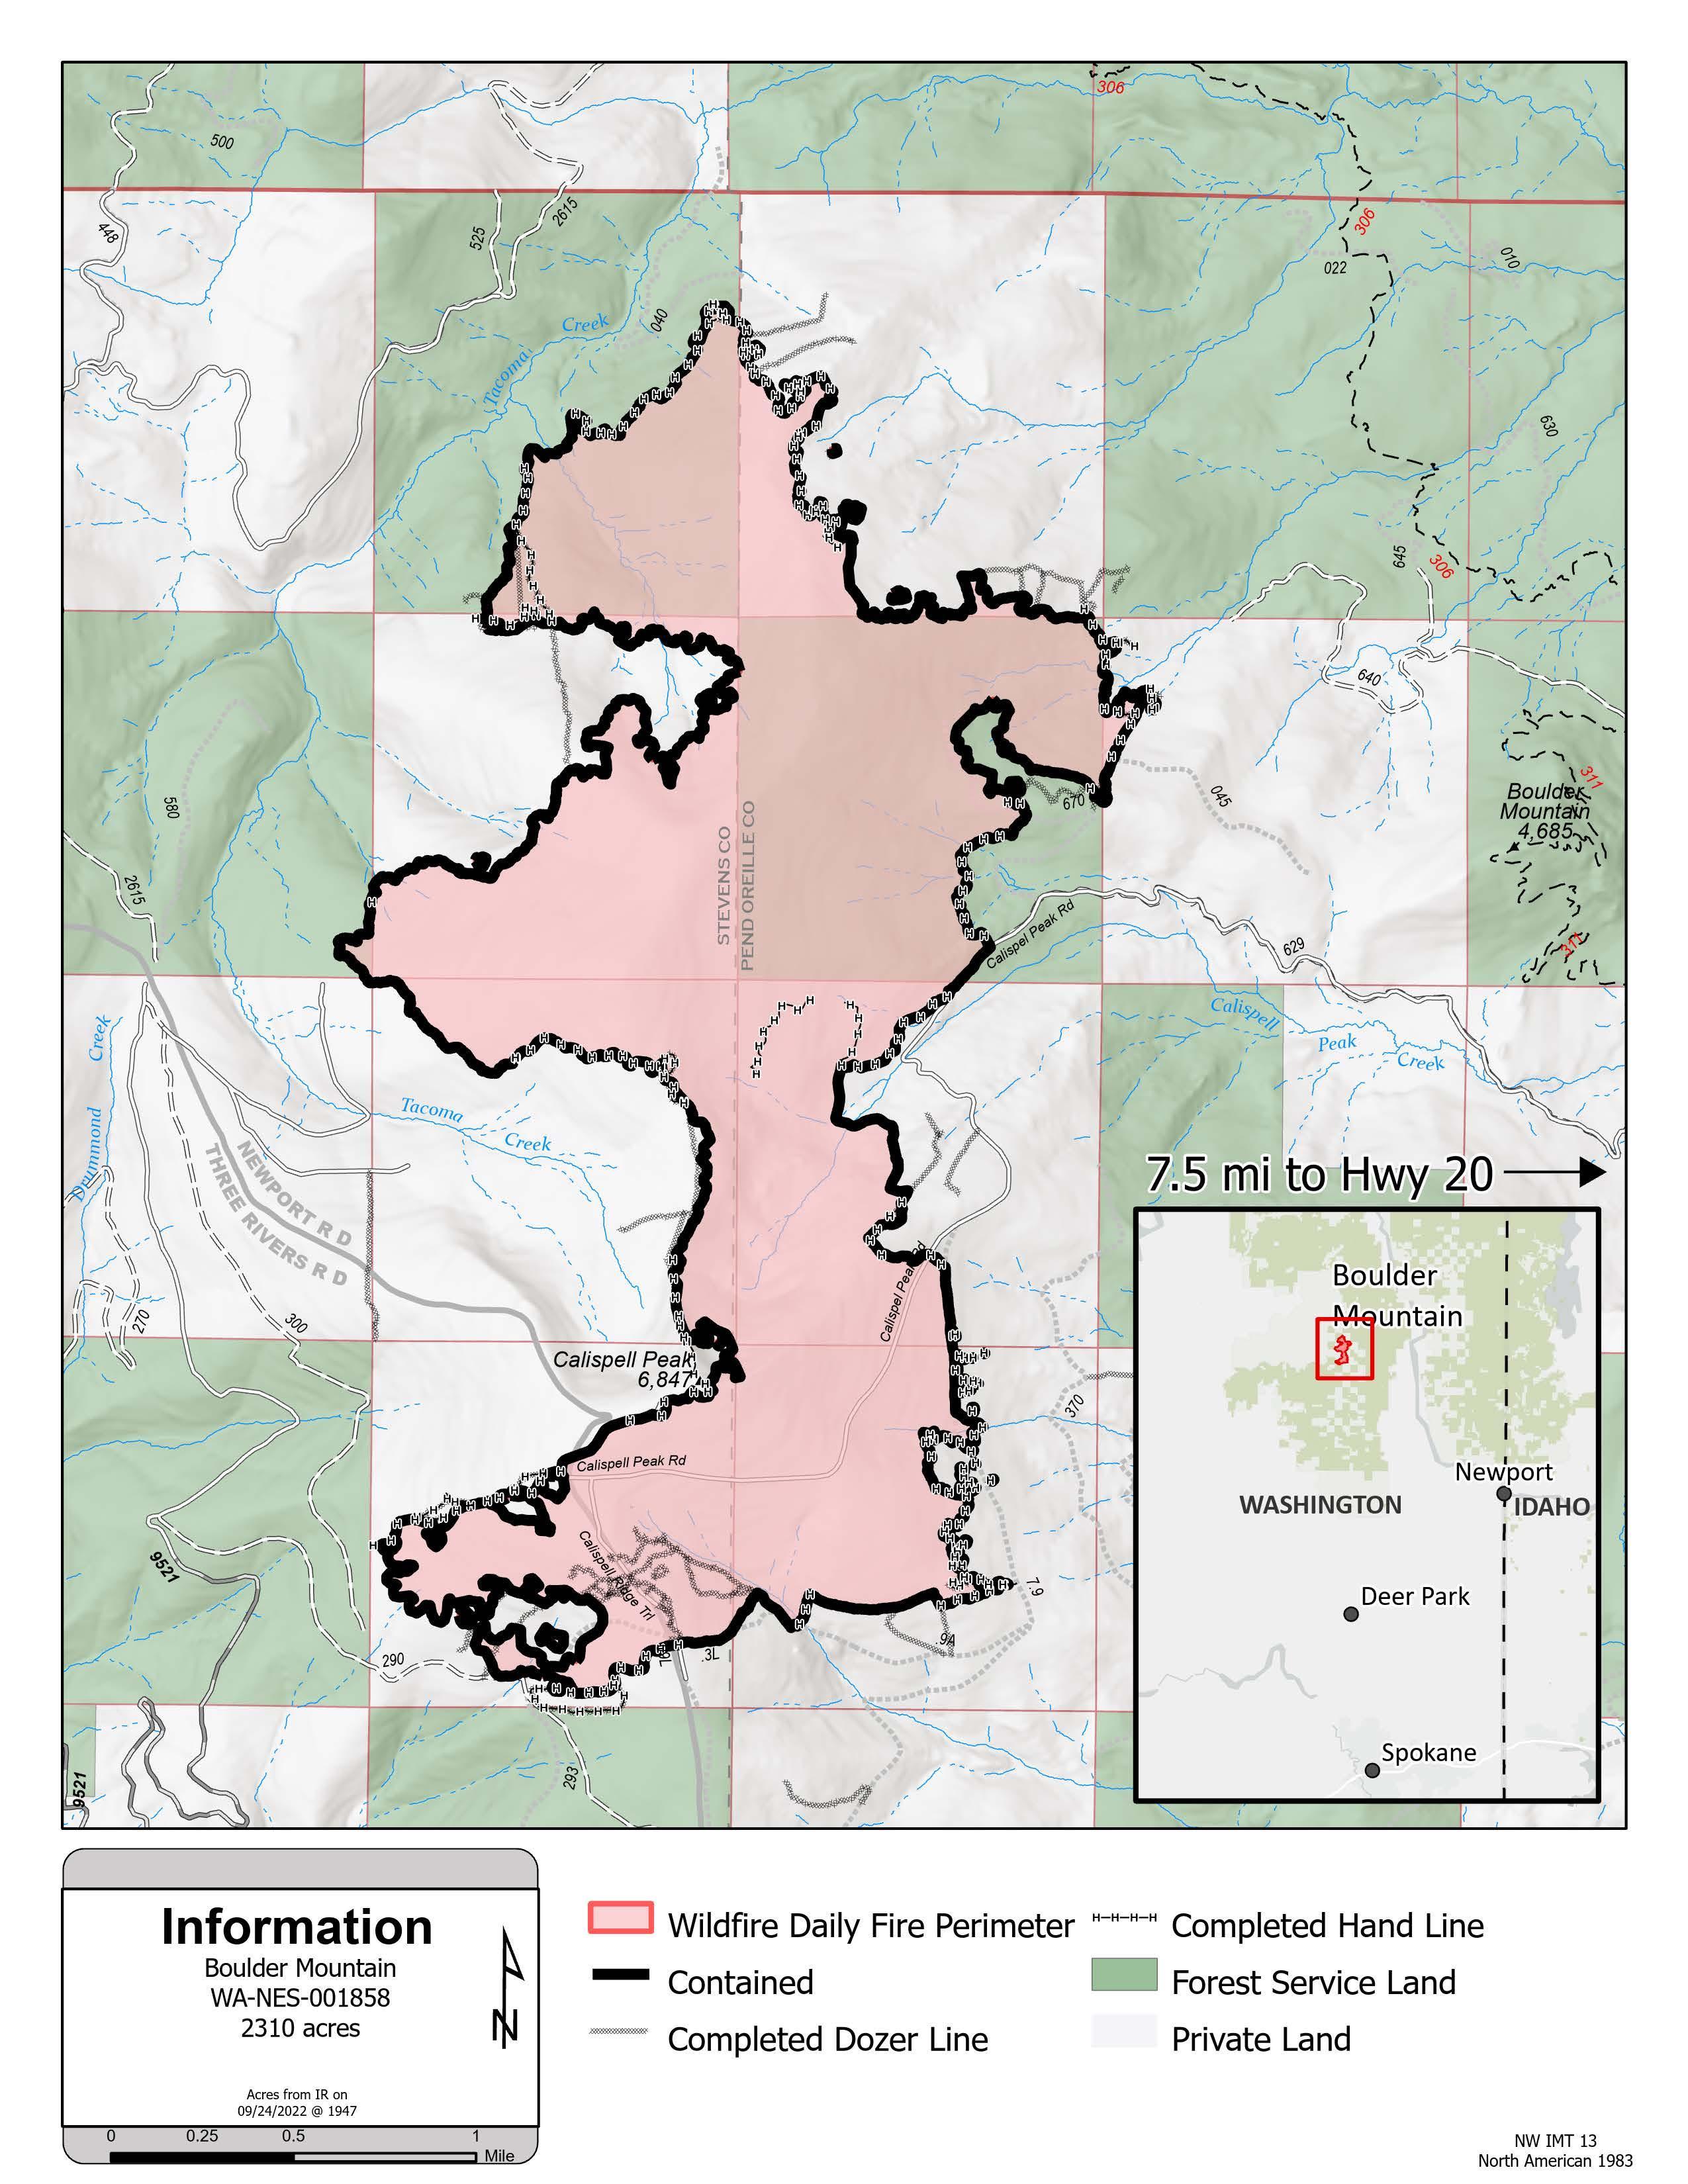 Boulder Mountain Fire map for Monday, Sept. 26